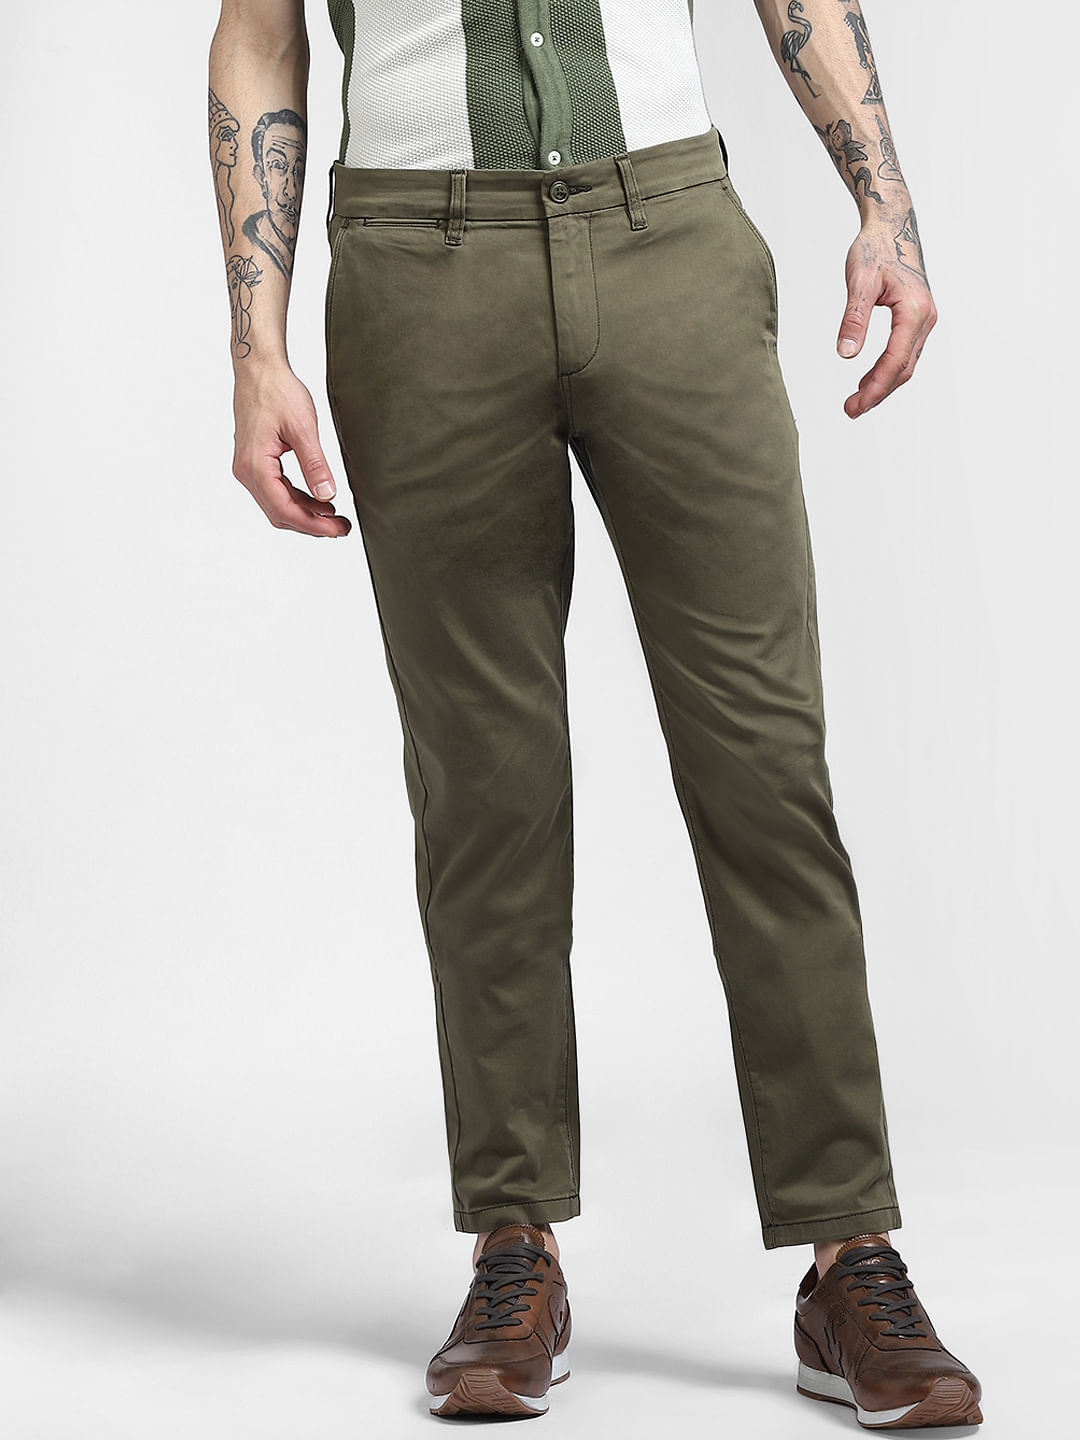 Buy Olive Green Trousers  Pants for Men by iVOC Online  Ajiocom